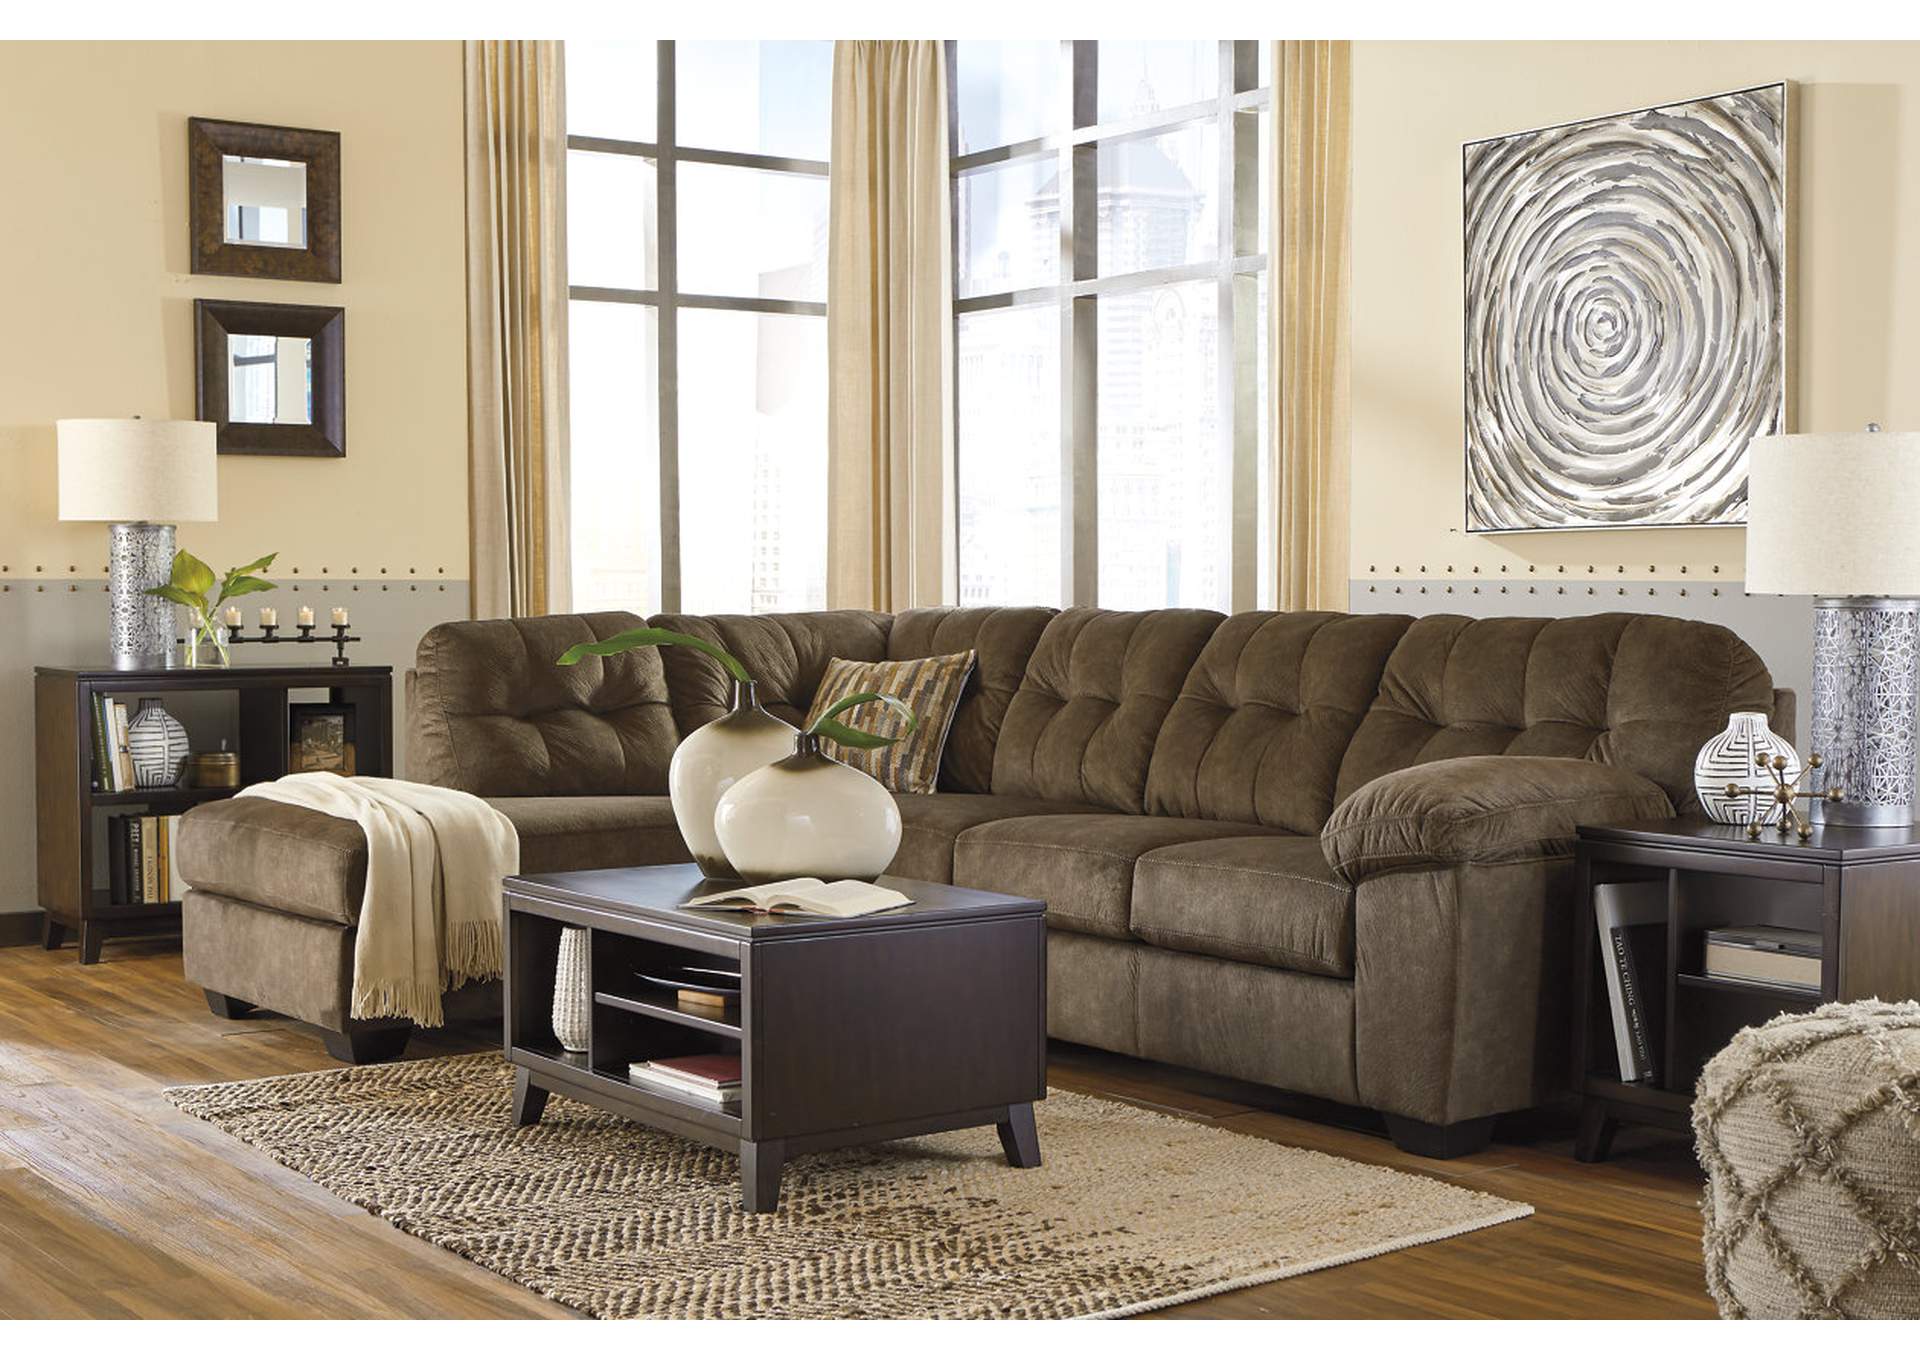 Accrington 2-Piece Sleeper Sectional with Chaise,Signature Design By Ashley